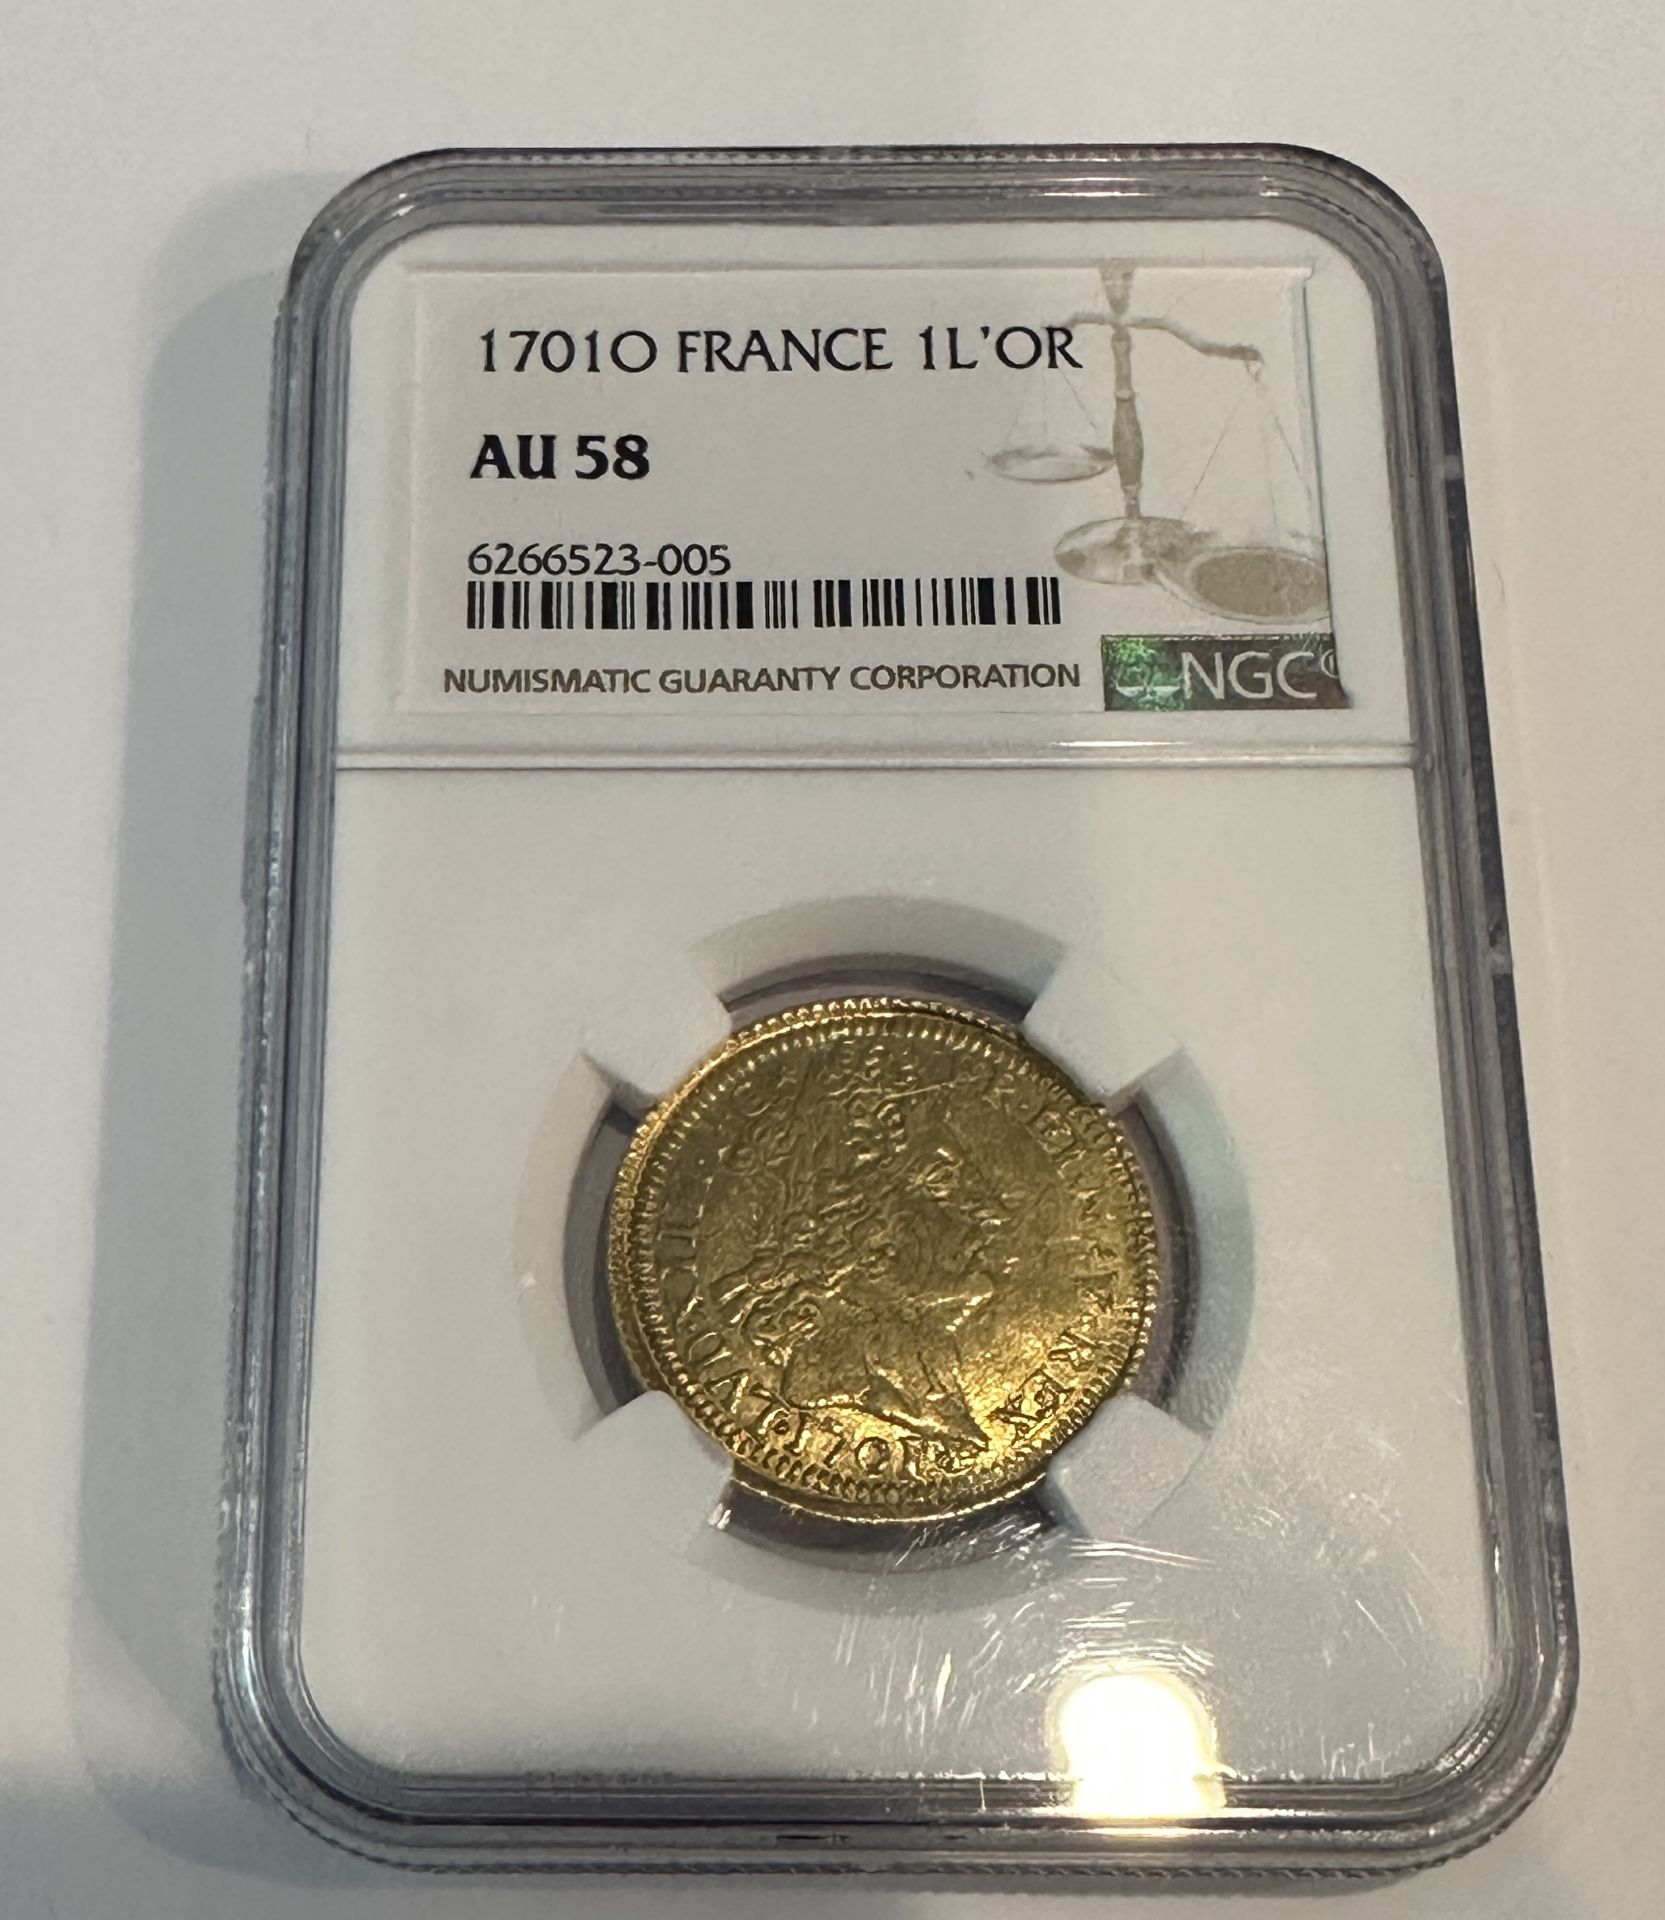 VERY RARE 1701O FRANCE 1 L'OR GOLD COIN AU 58 NGC TOP-POP